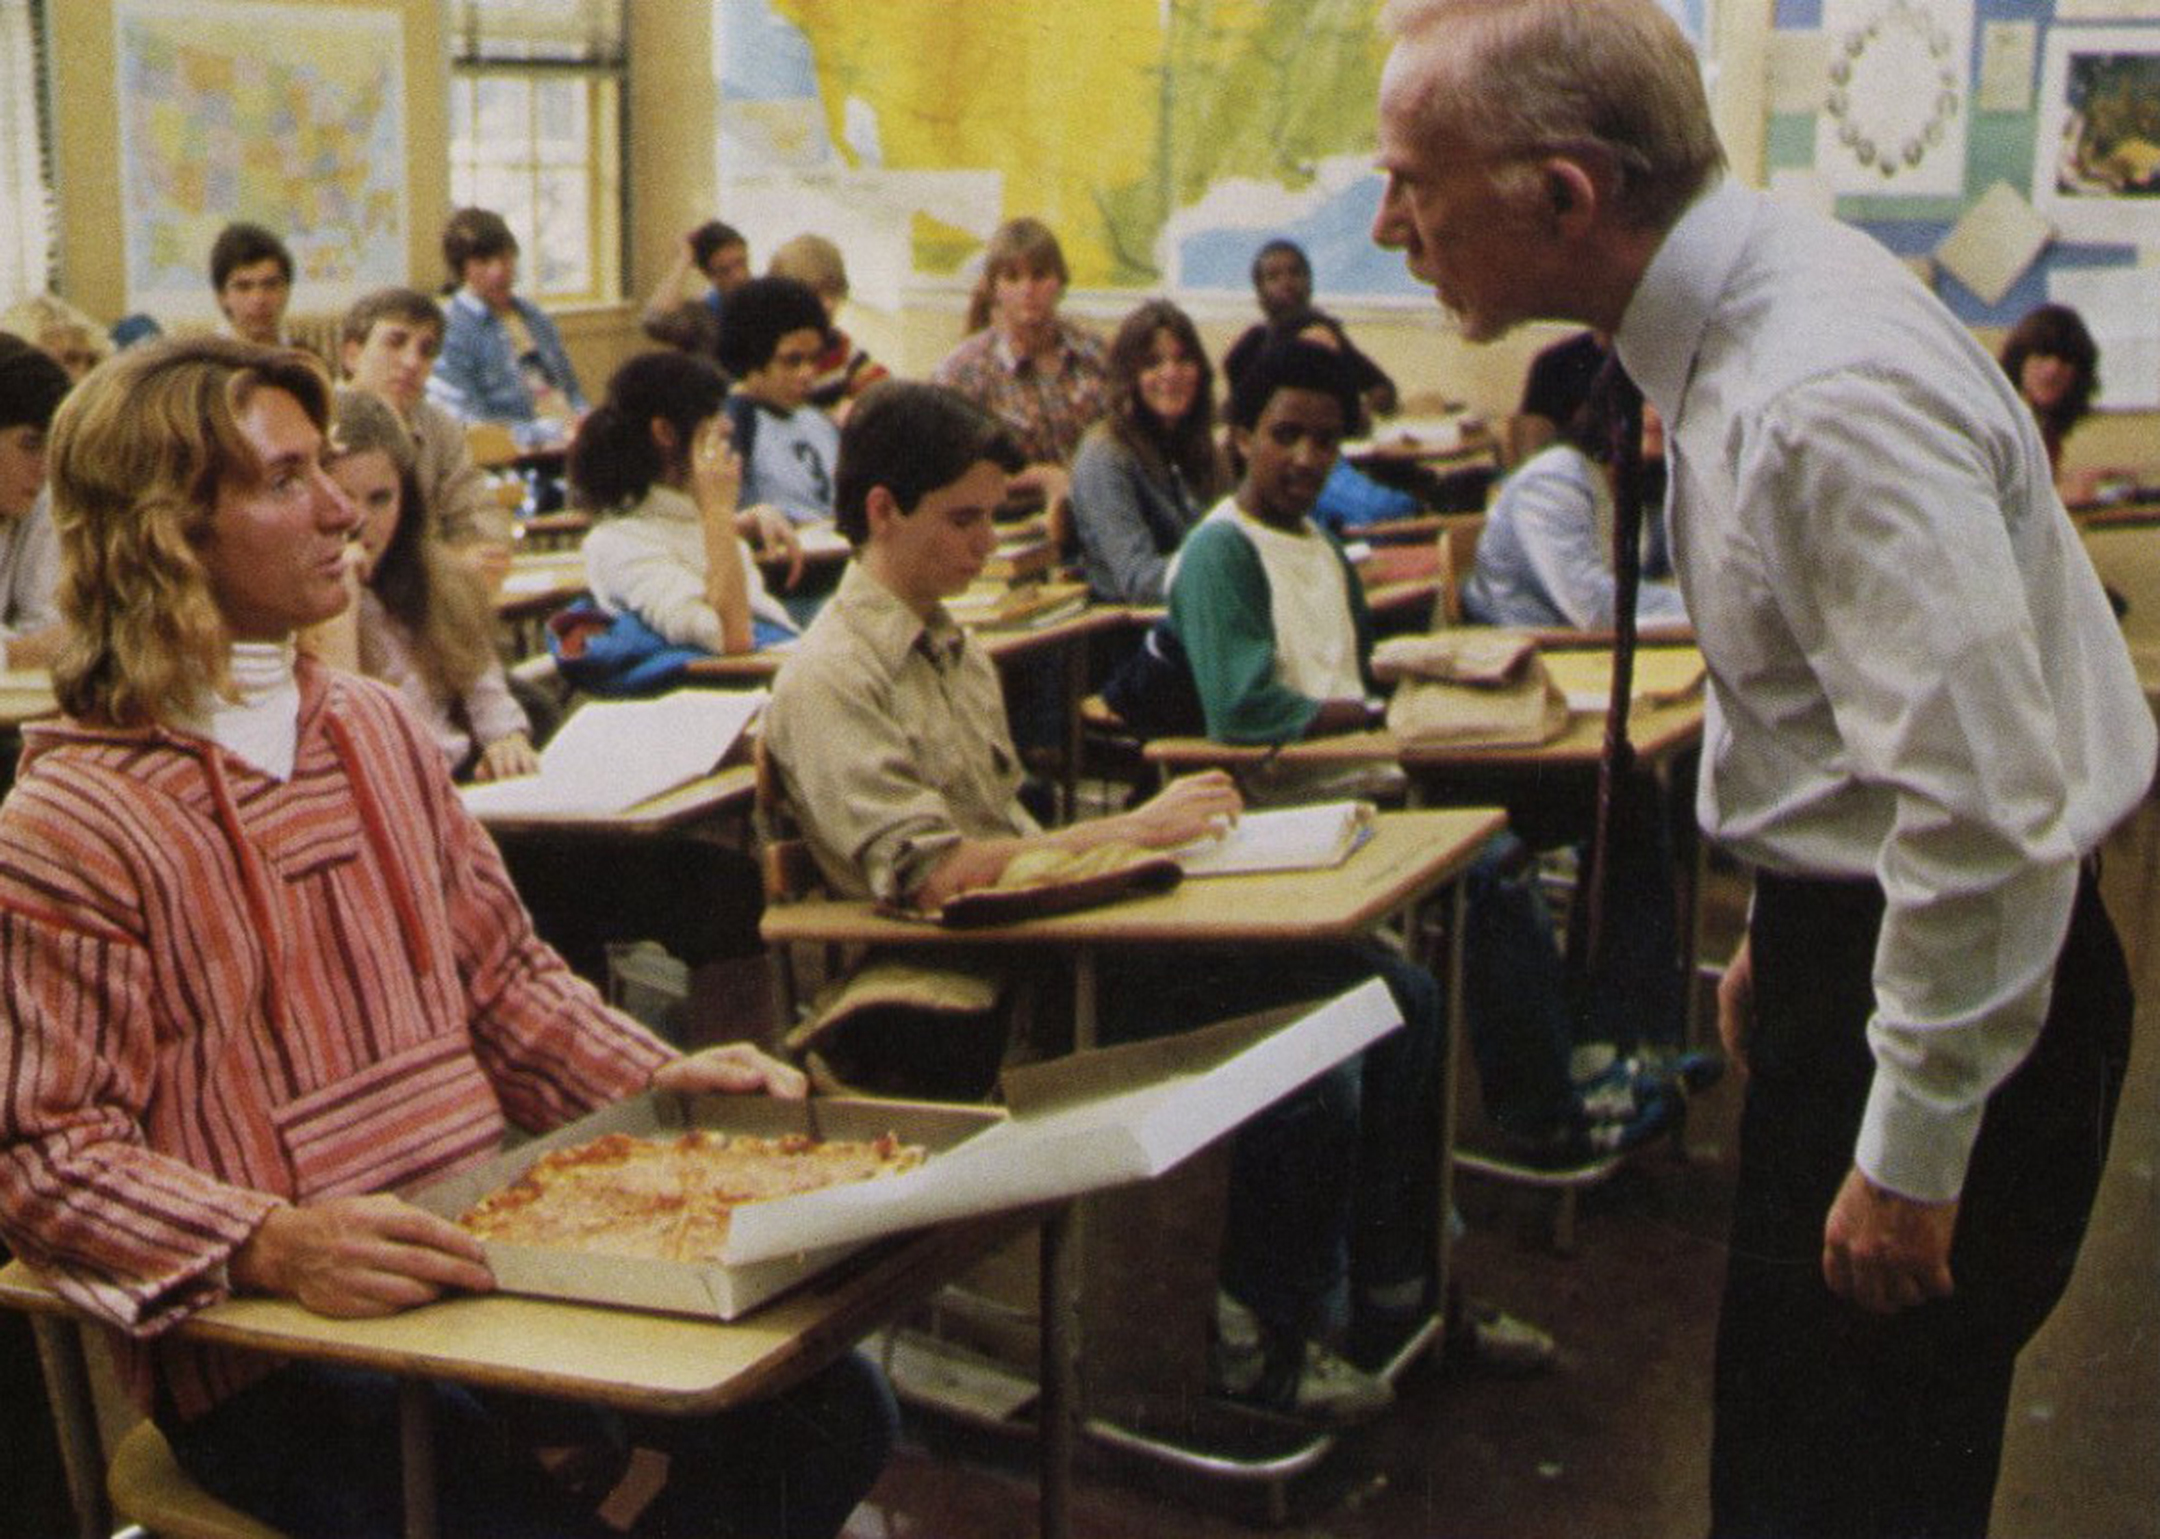 Movie still showing a student eating a pizza at his desk while being yelled at by his teacher